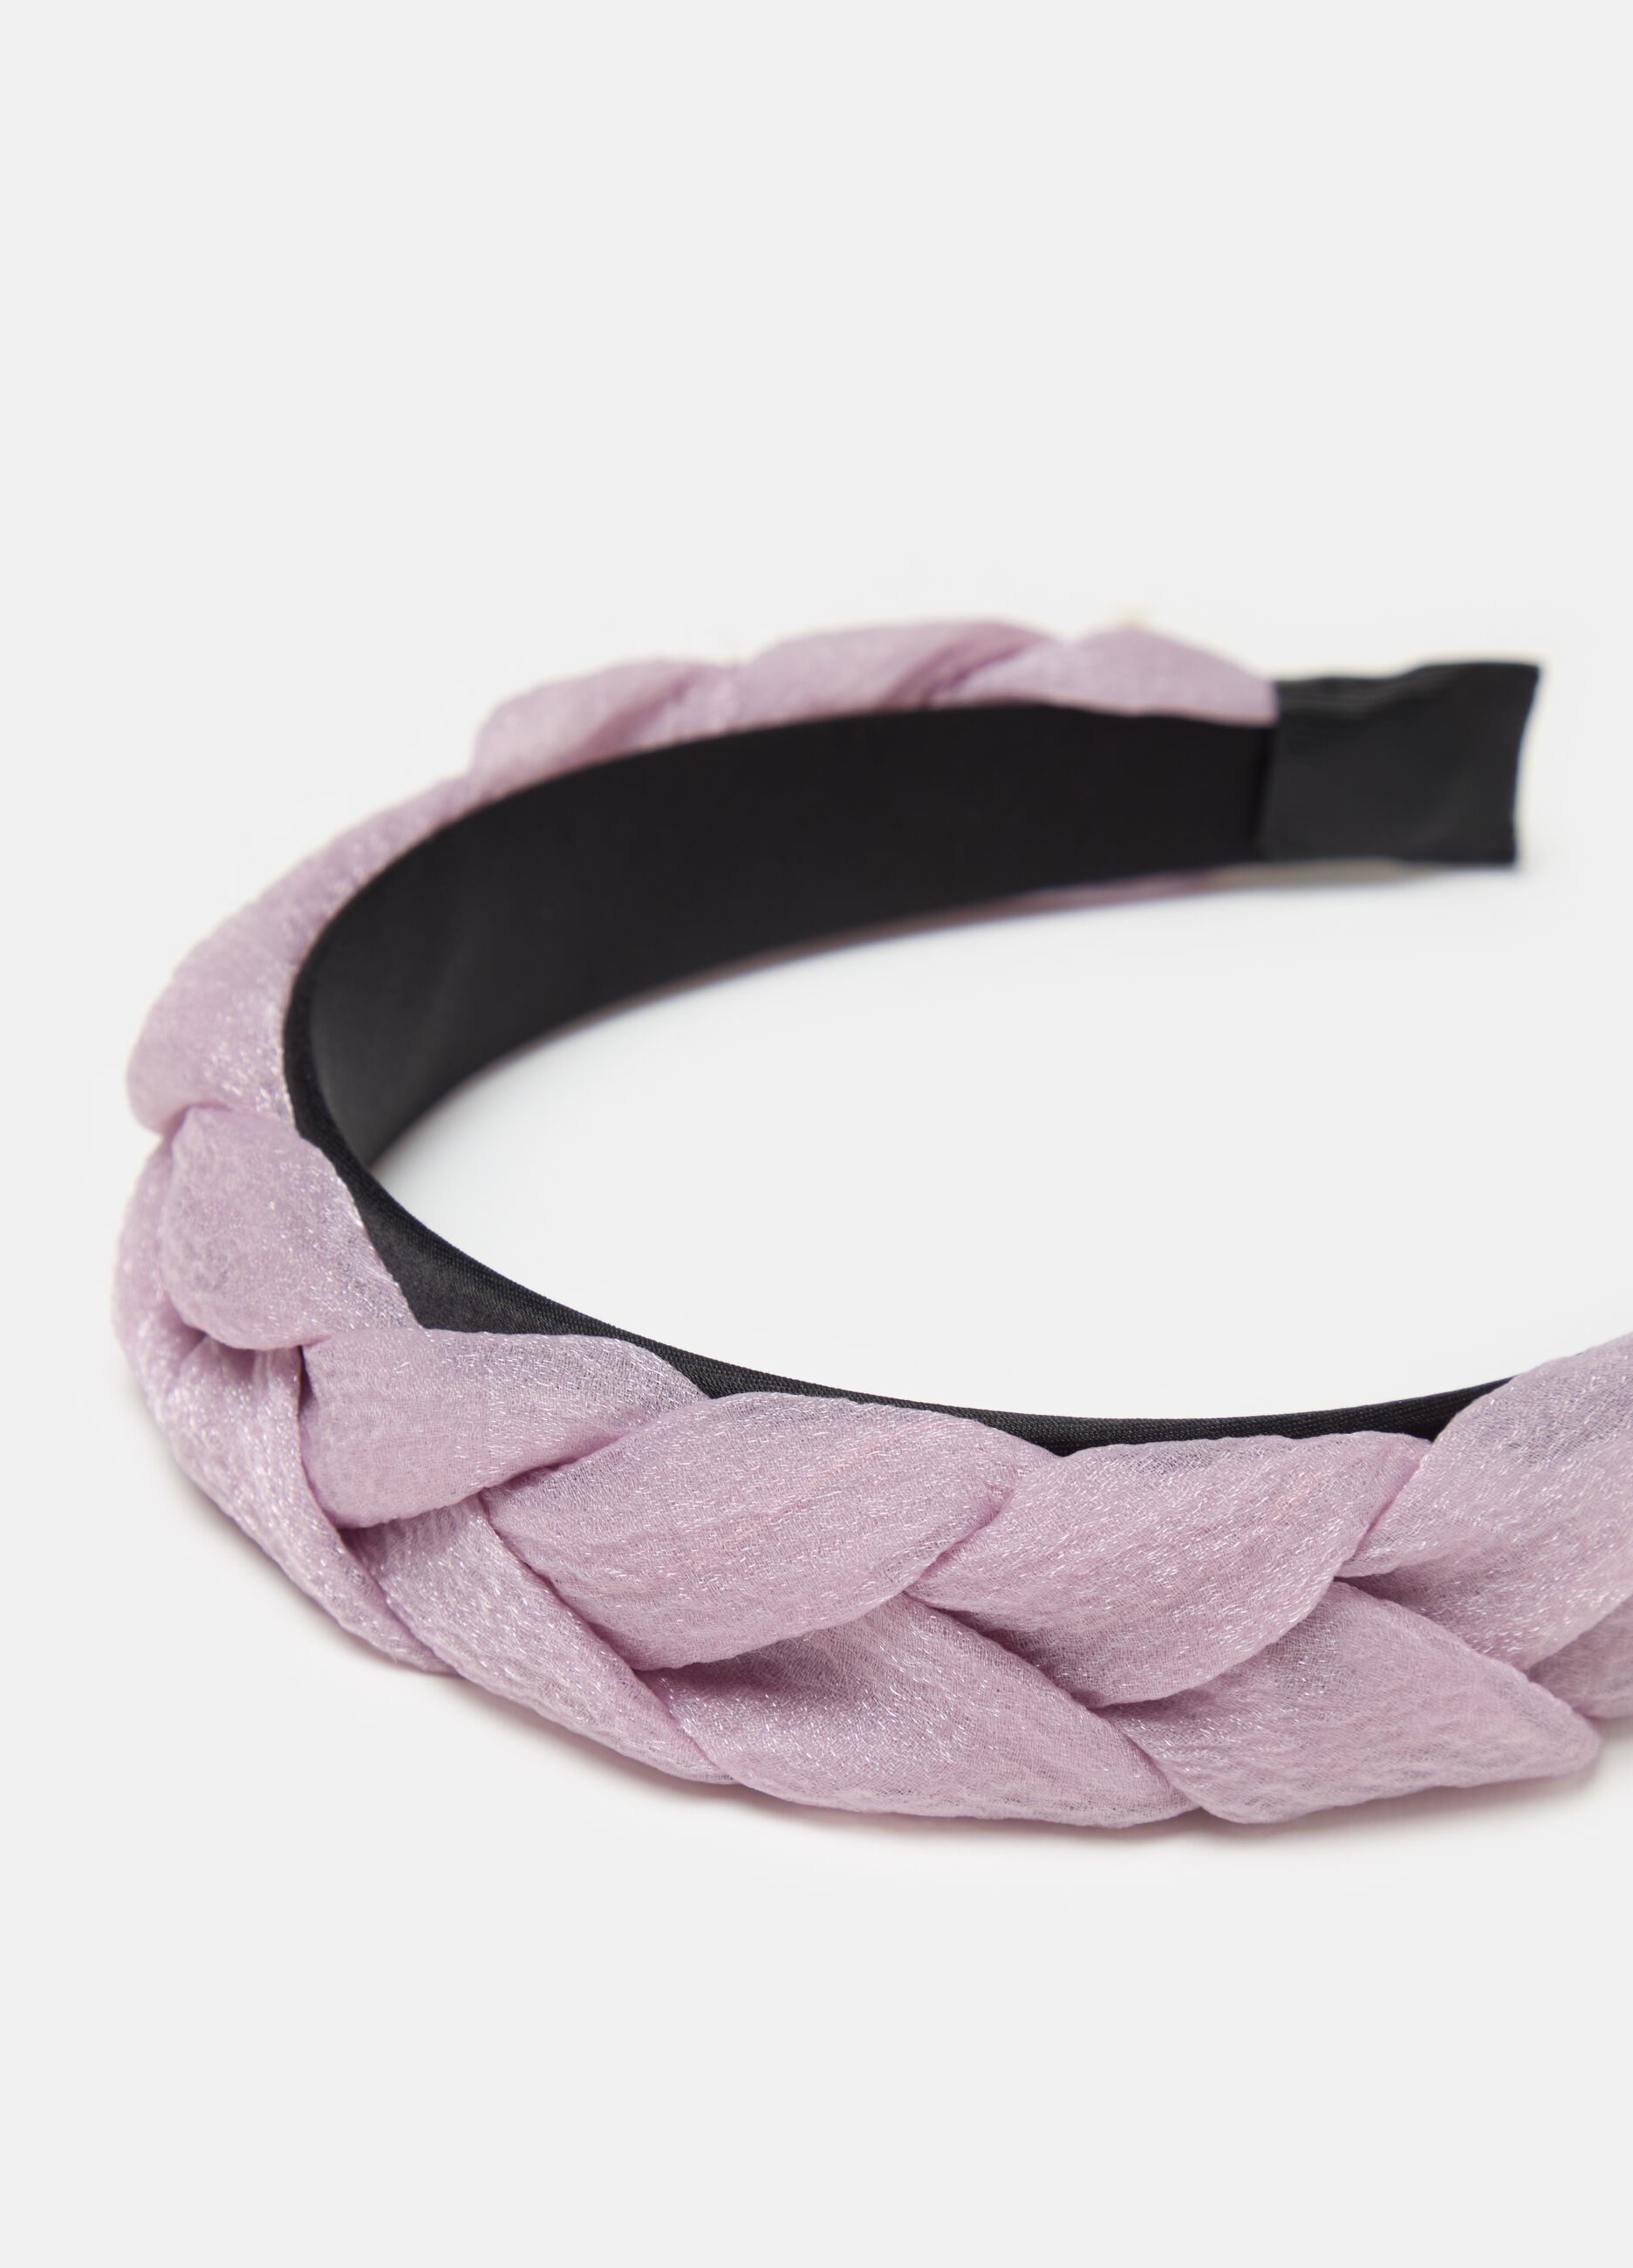 Alice band in braided fabric